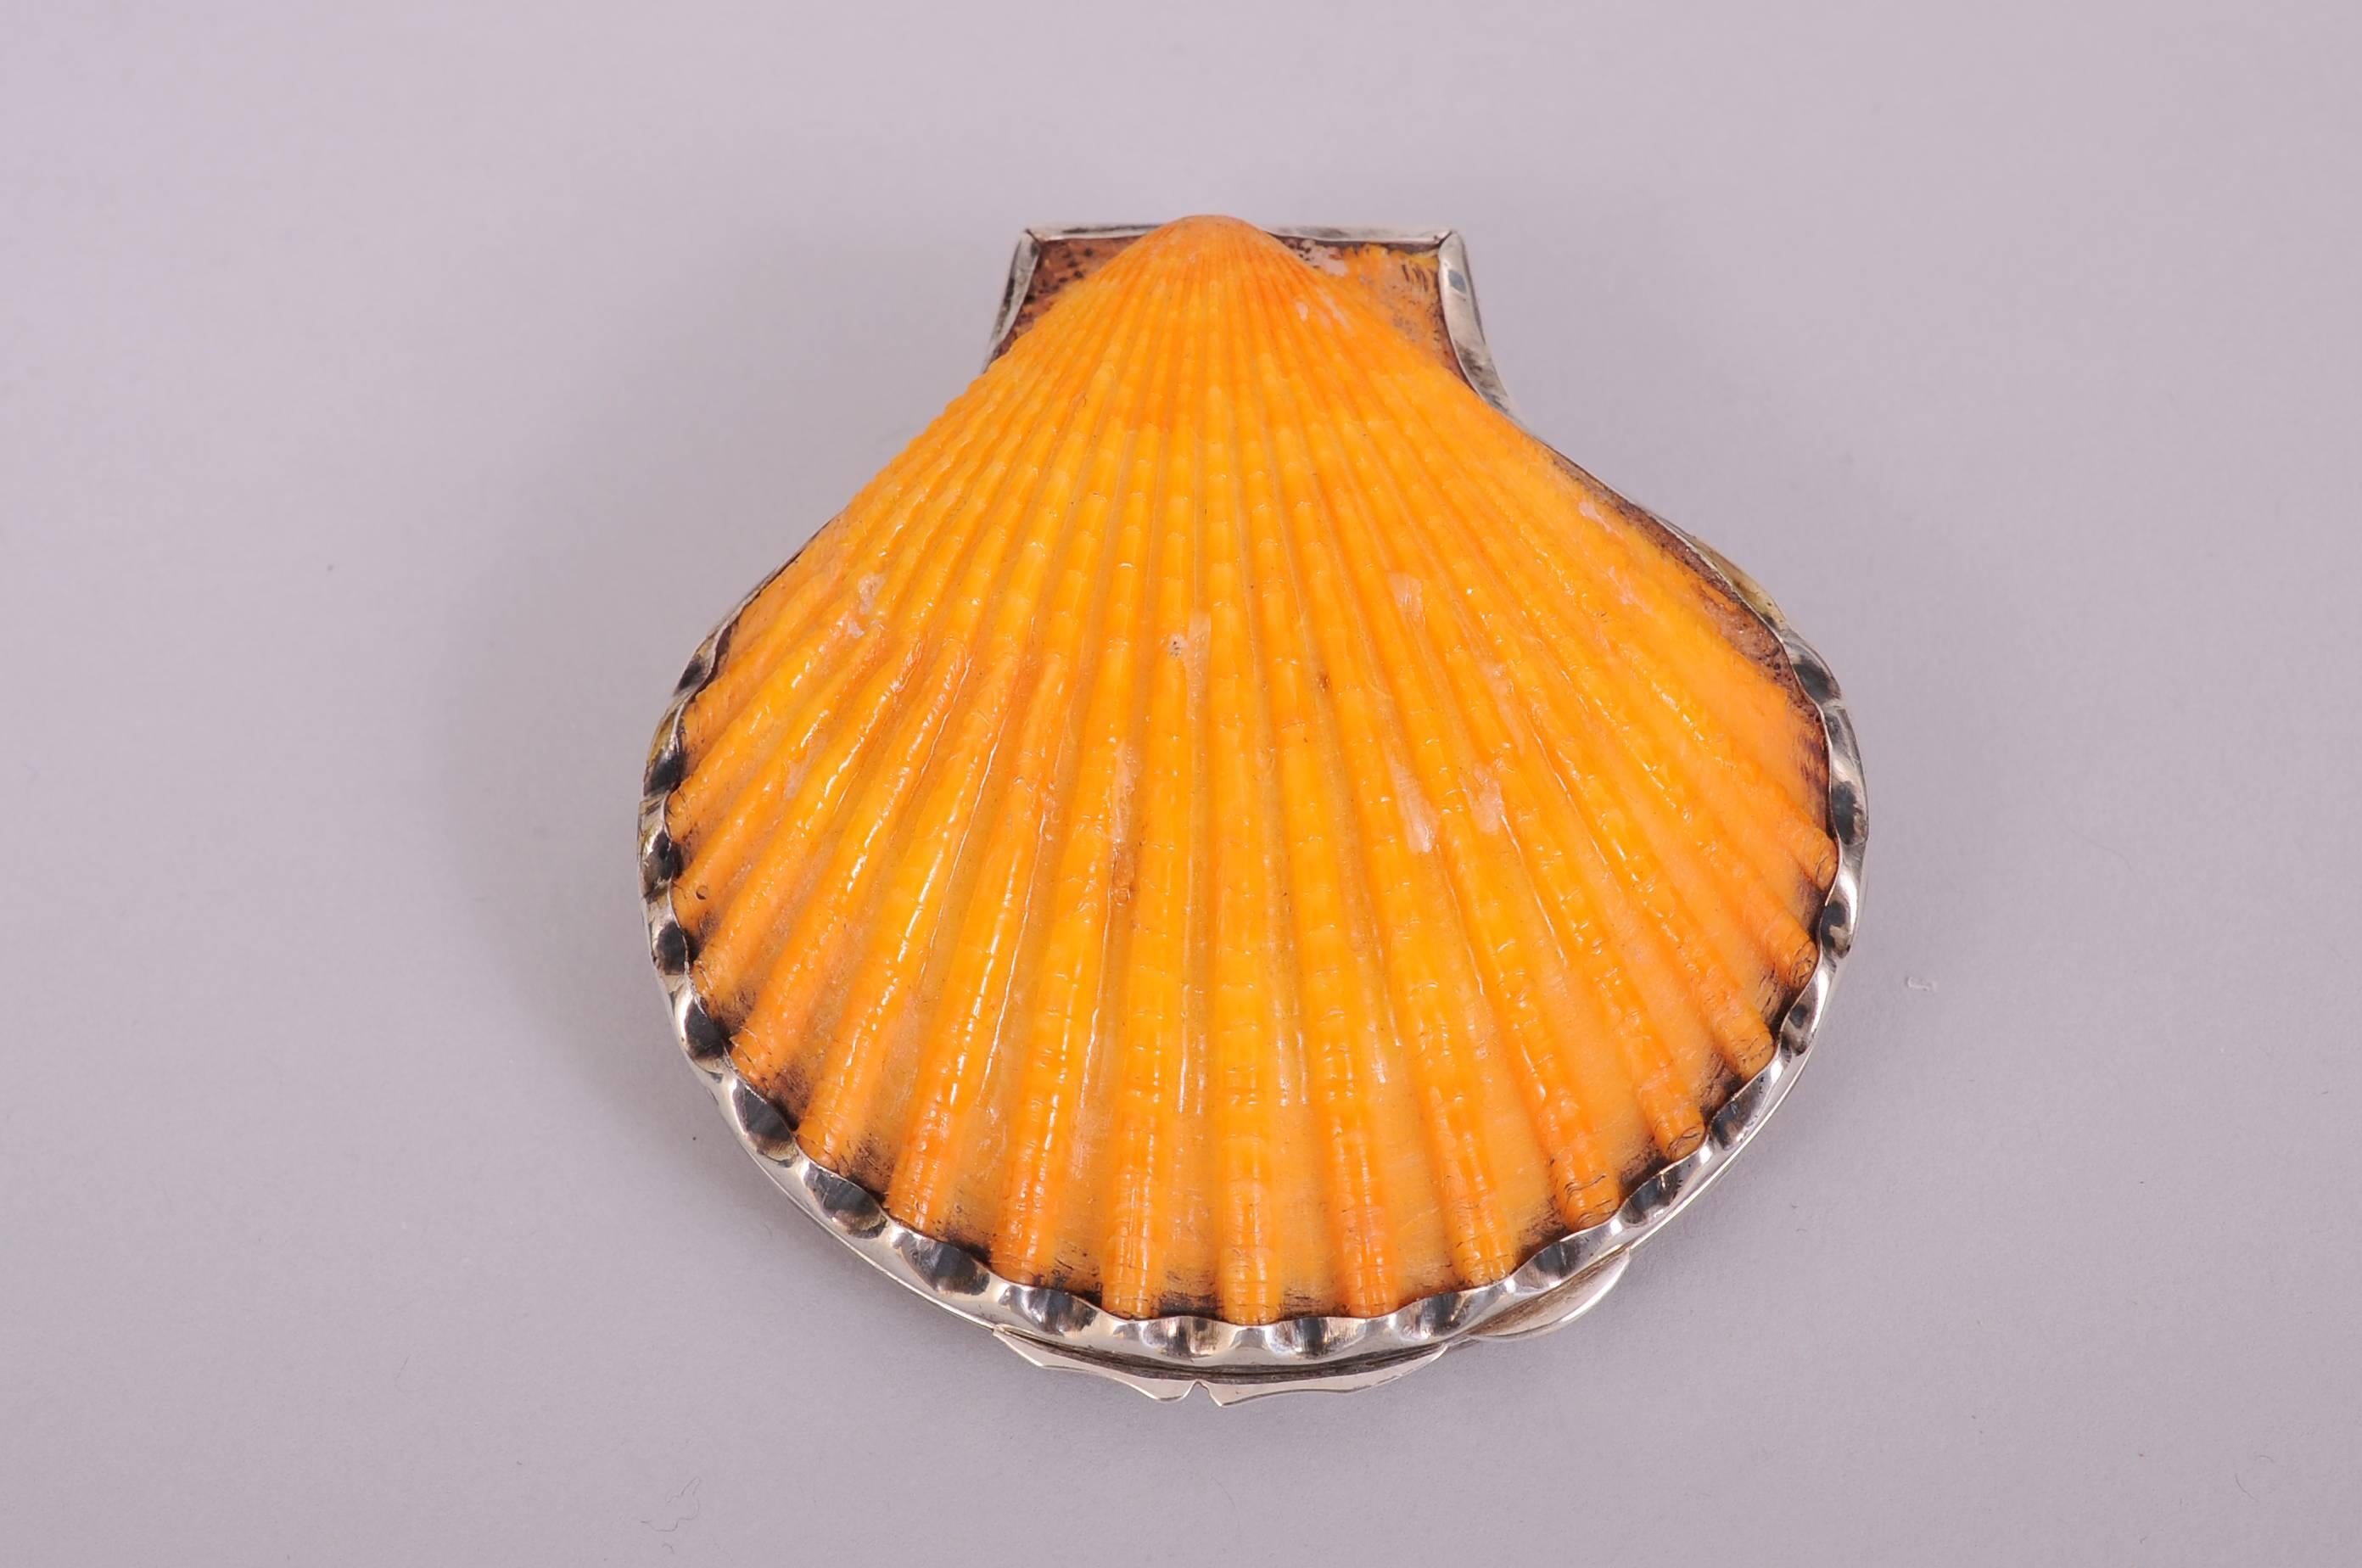 A large saffron colored scallop shell is completely edged with sterling silver. The silver is crimped to follow the edge of the shell. It opens to reveal the pale inside of the shell on top and a round mirror fitted into the other side of the shell.